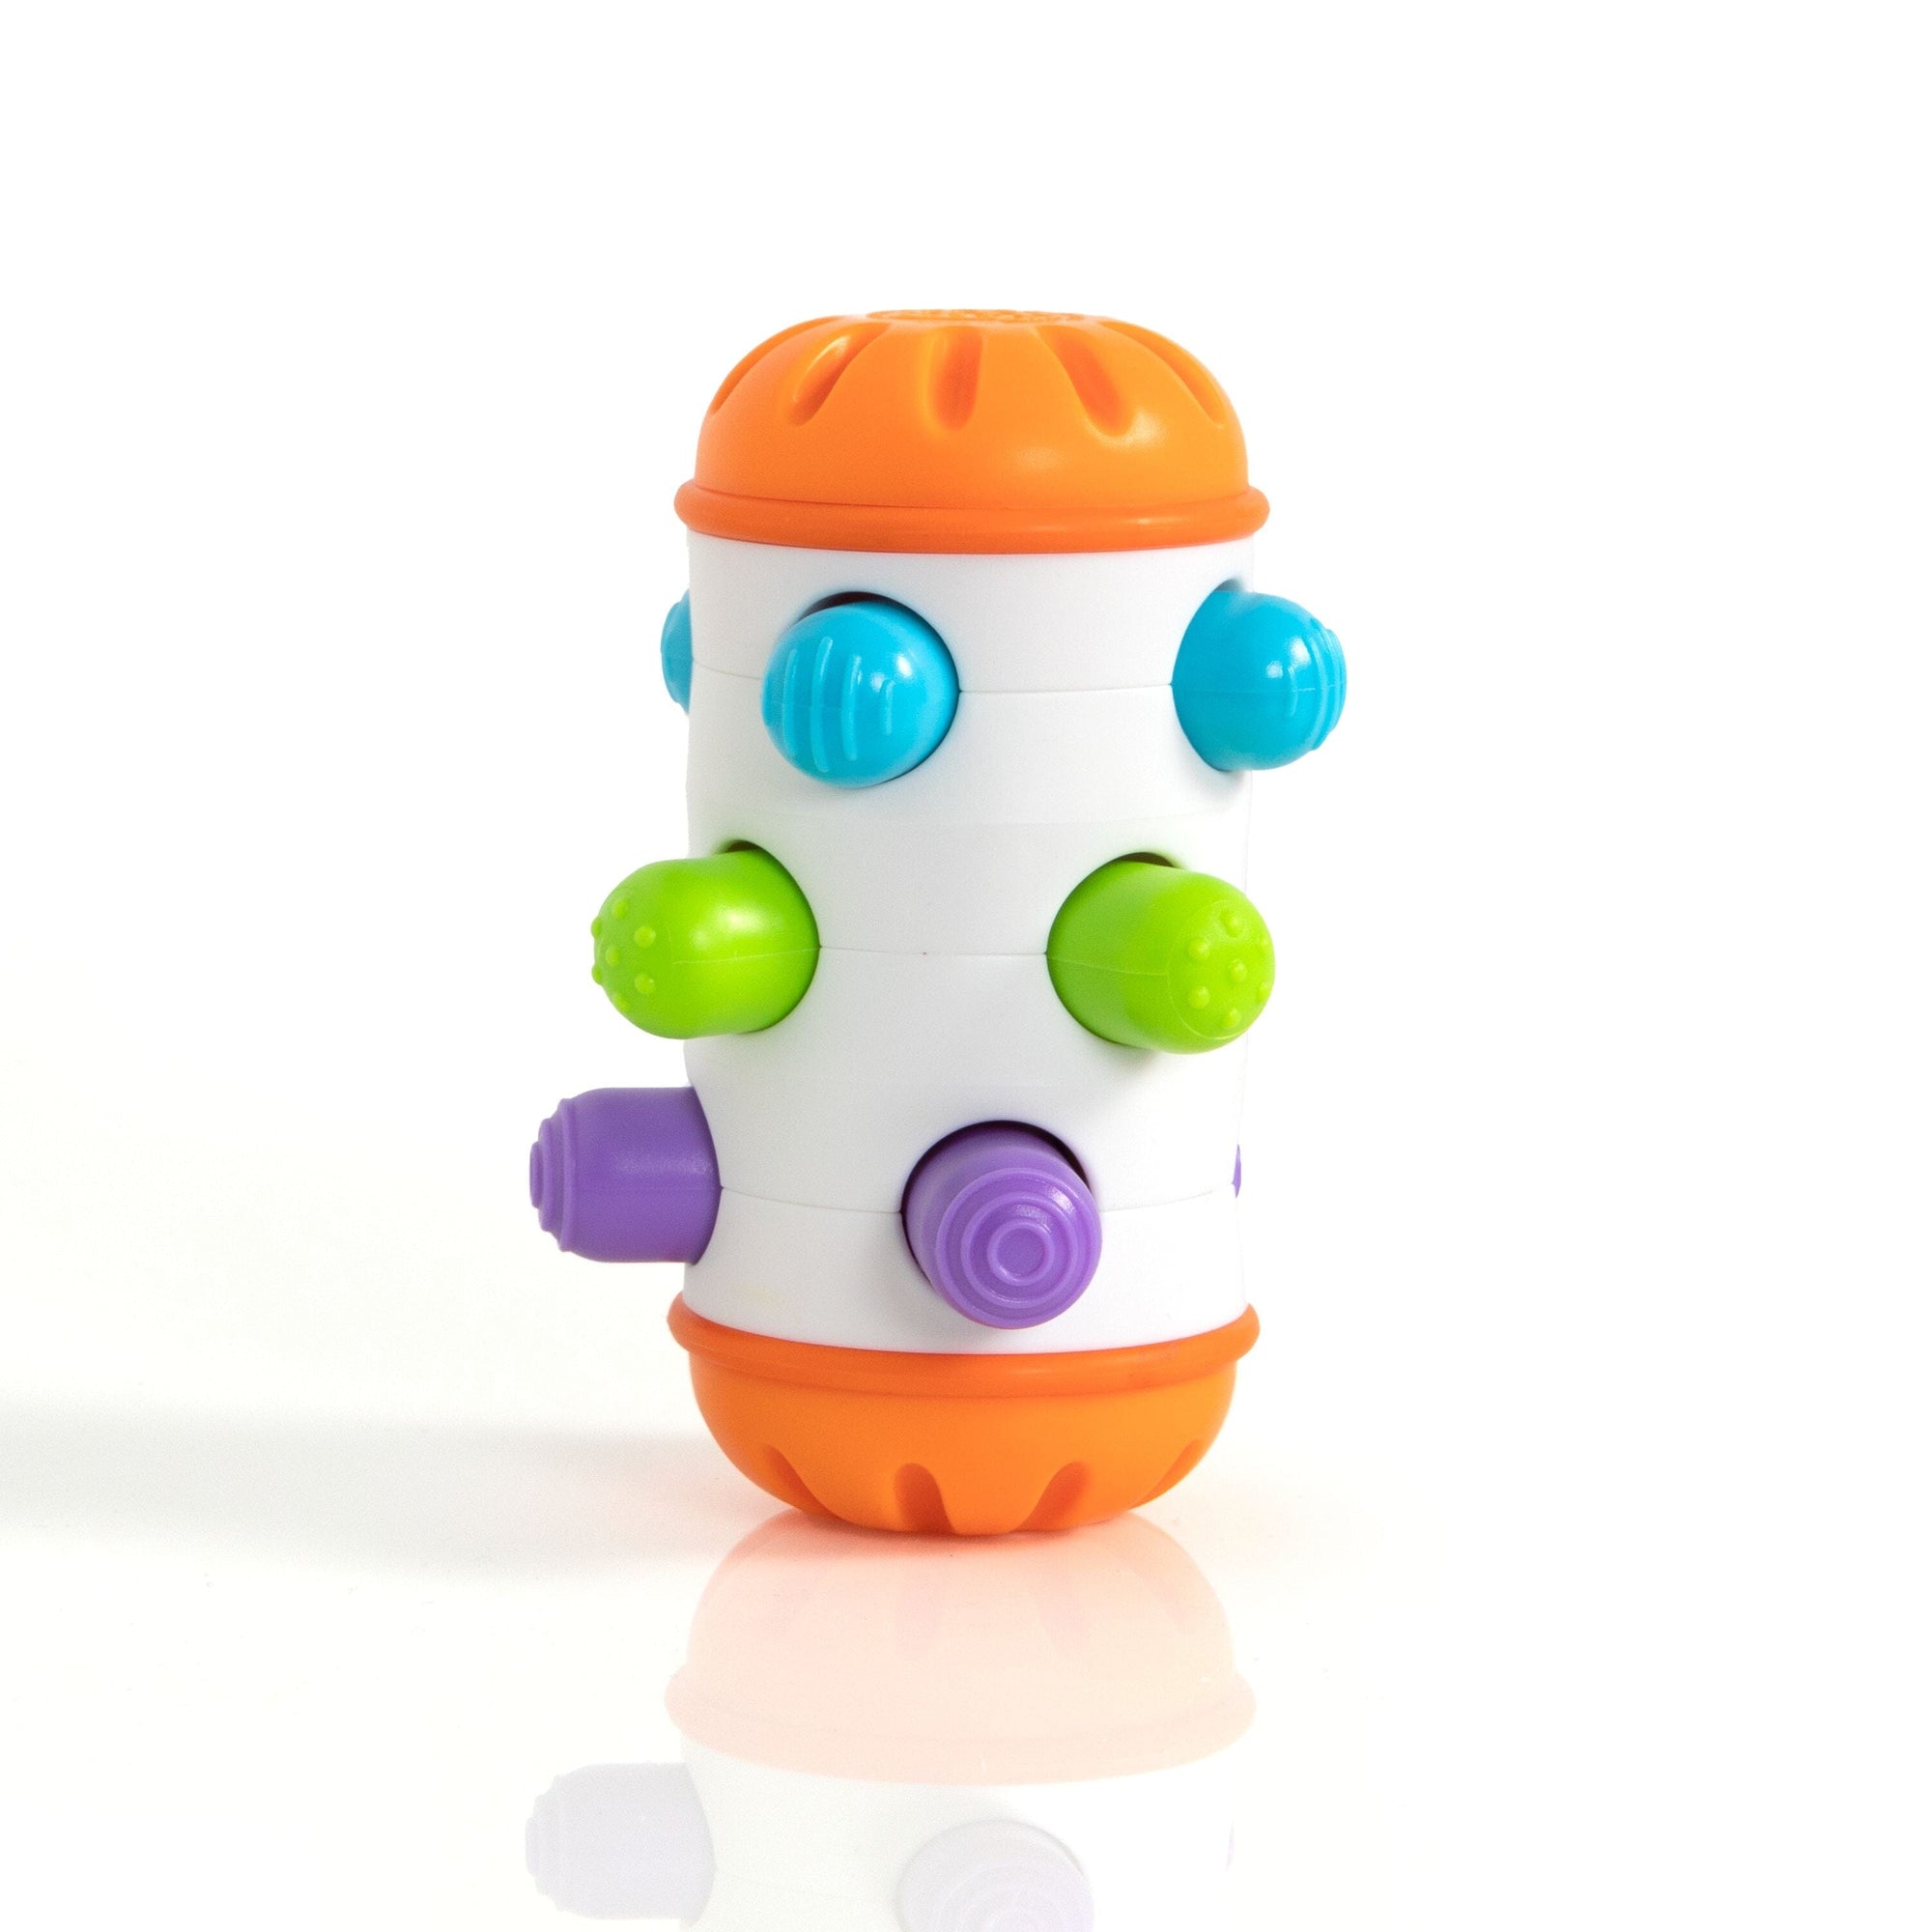 https://cdn.shopify.com/s/files/1/0744/8479/products/rolio-by-fat-brain-toys-toys-fat-brain-toy-co-215279_2000x.jpg?v=1695688309